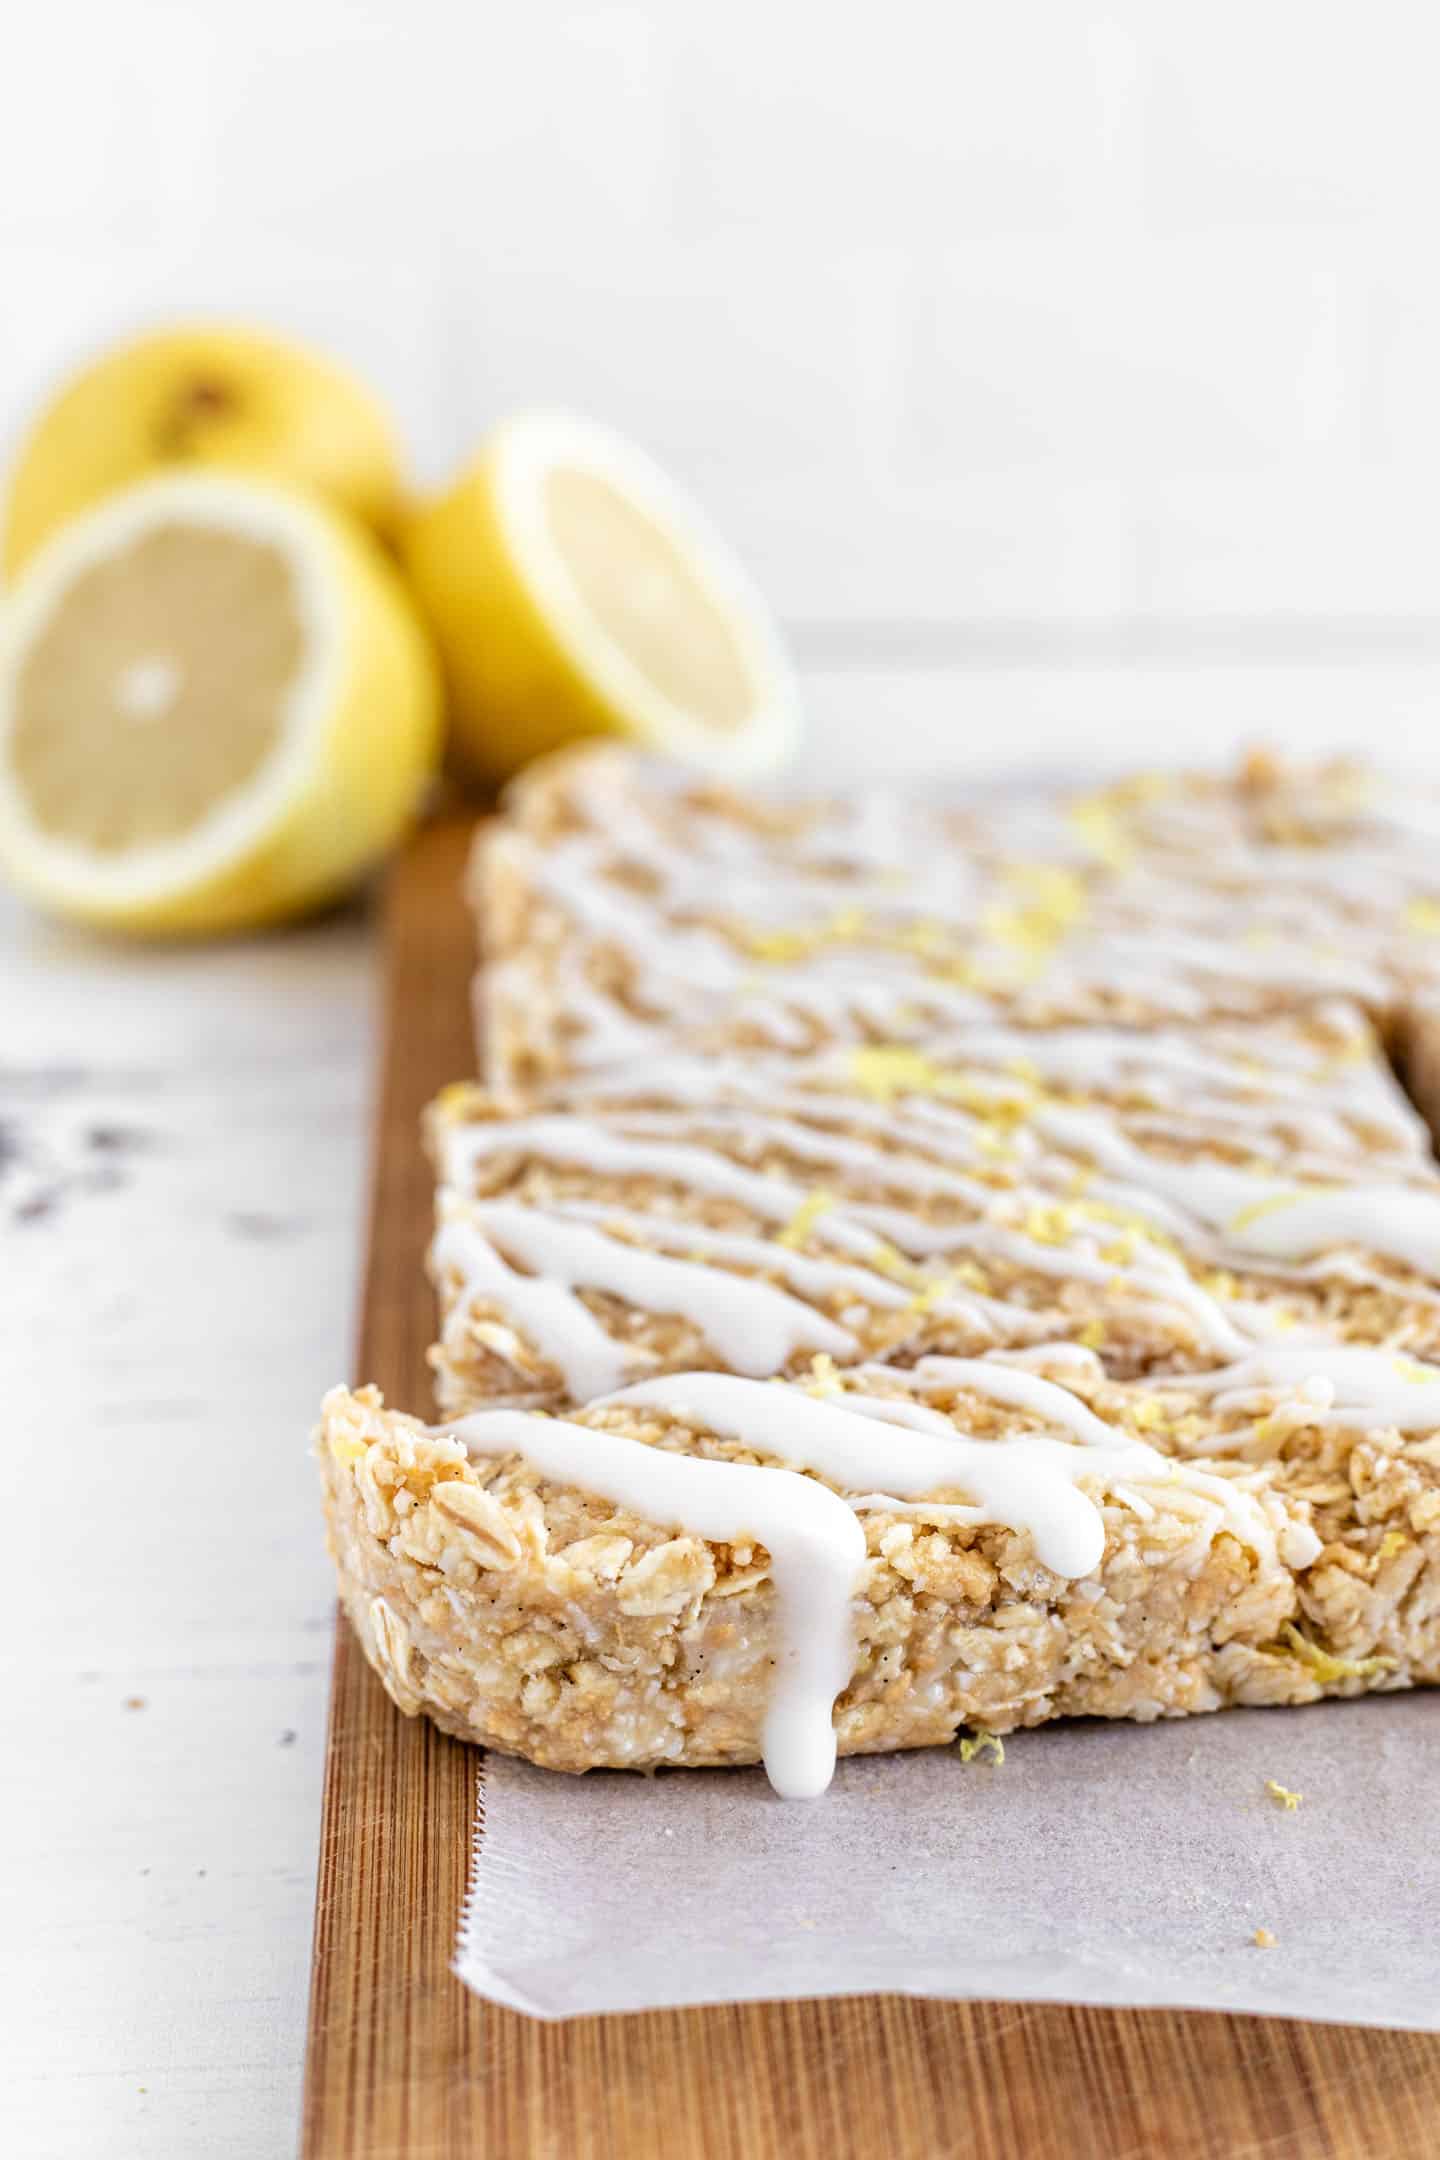 Lemon, coconut and oats bars on a wooden board and some lemons in the background